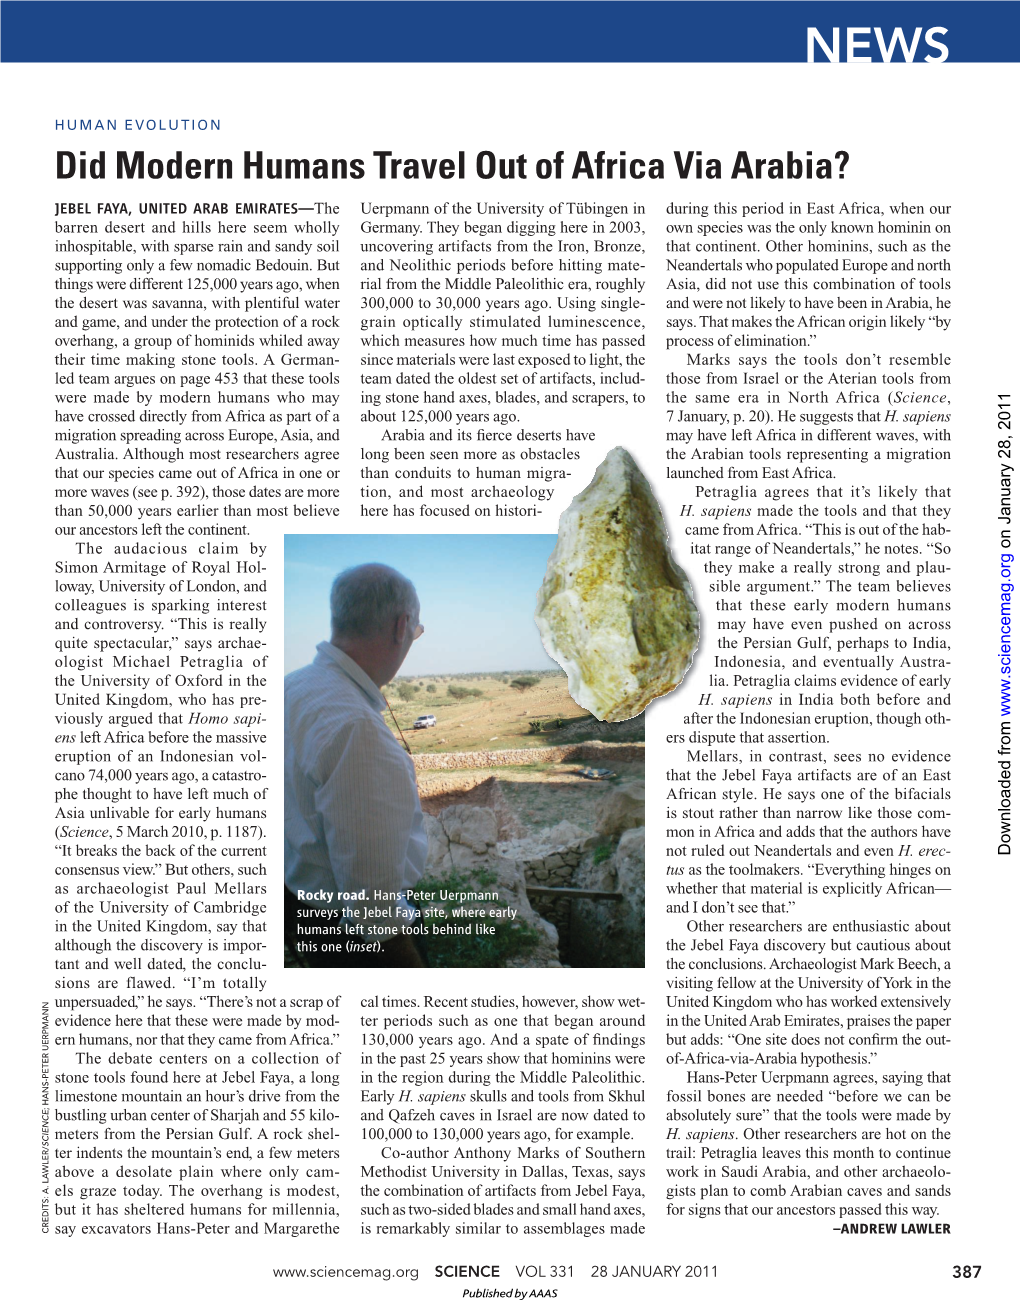 Did Modern Humans Travel out of Africa Via Arabia?